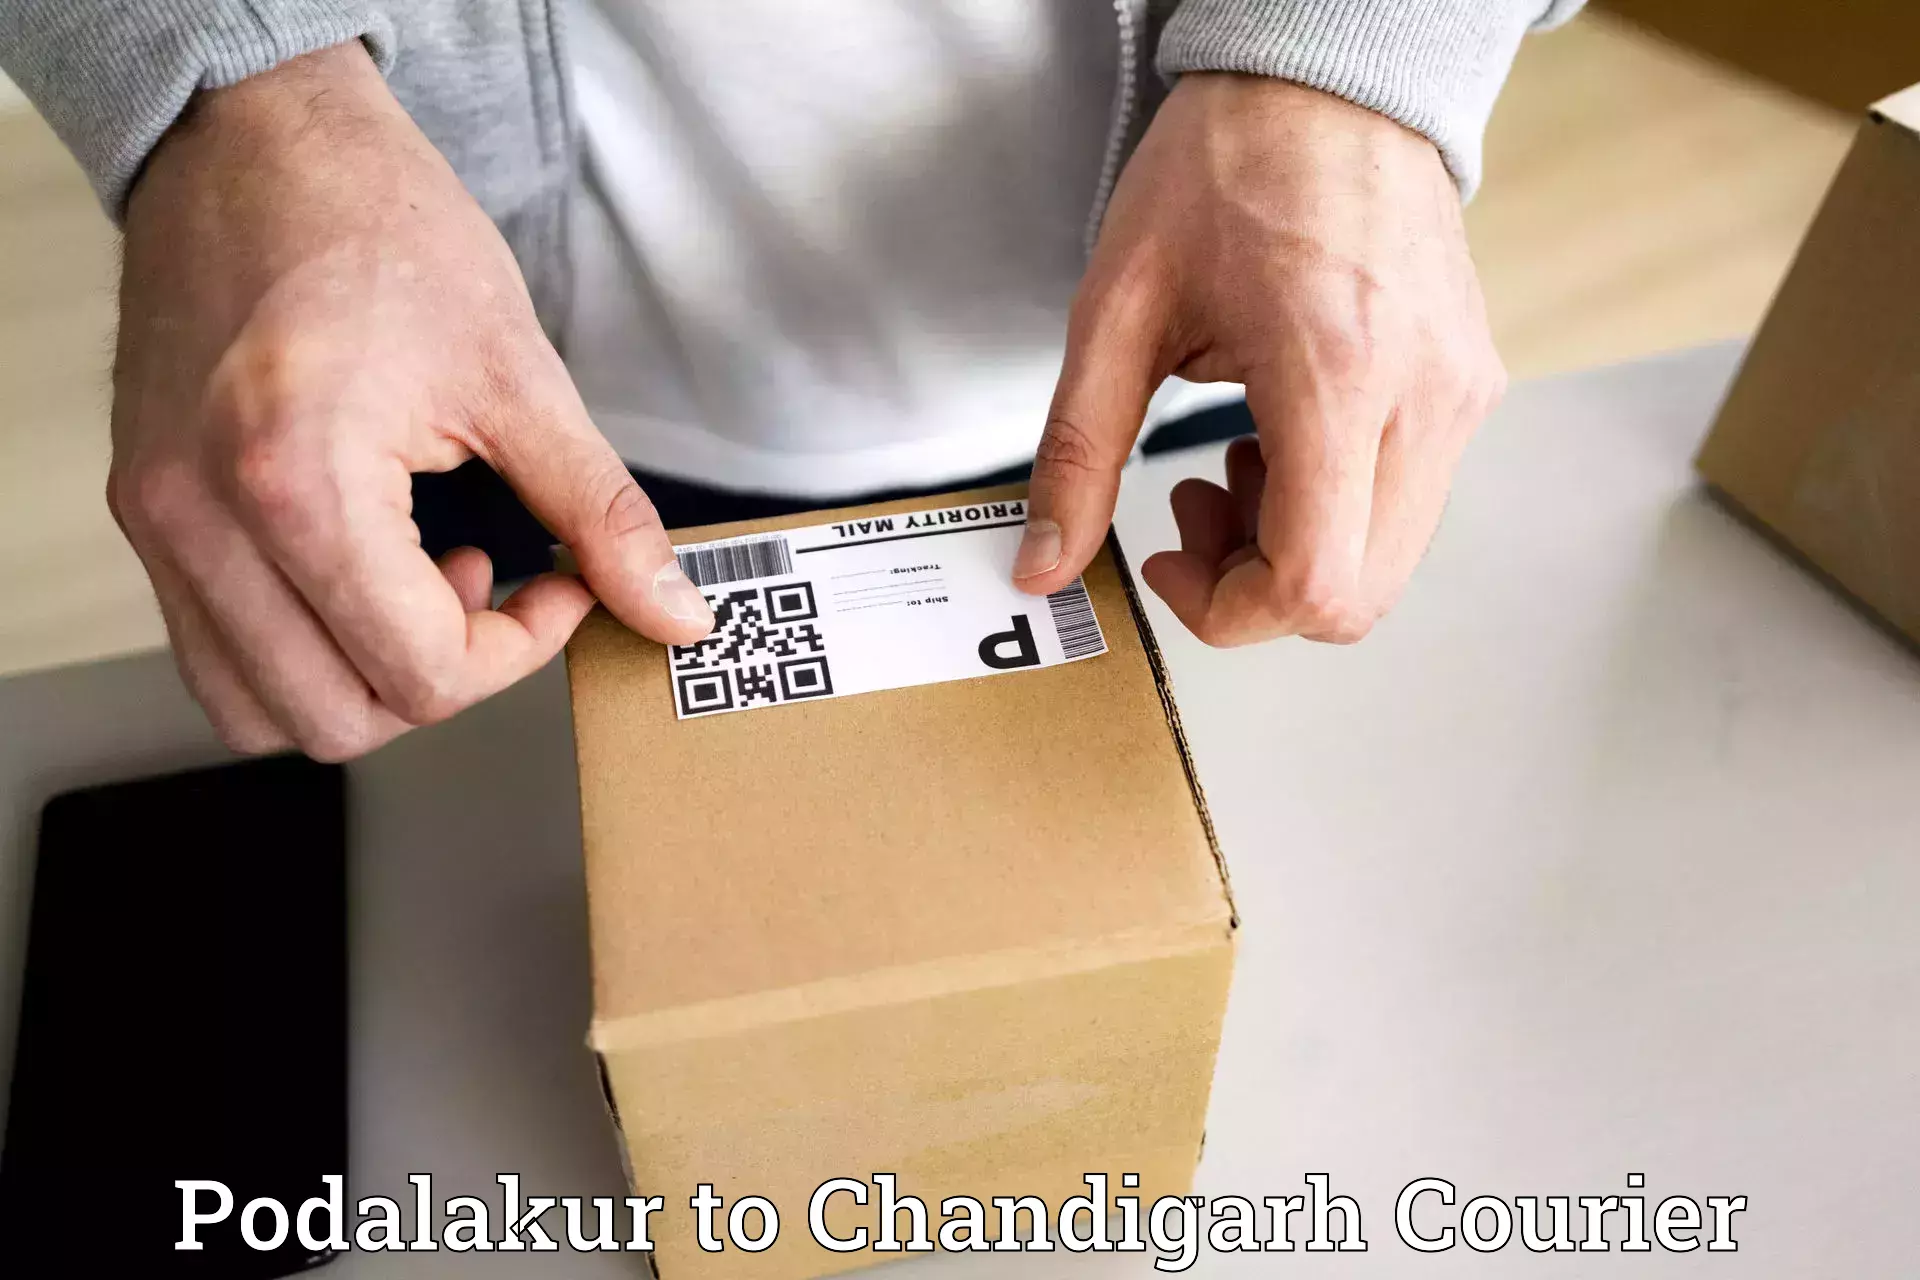 Next-day delivery options Podalakur to Chandigarh